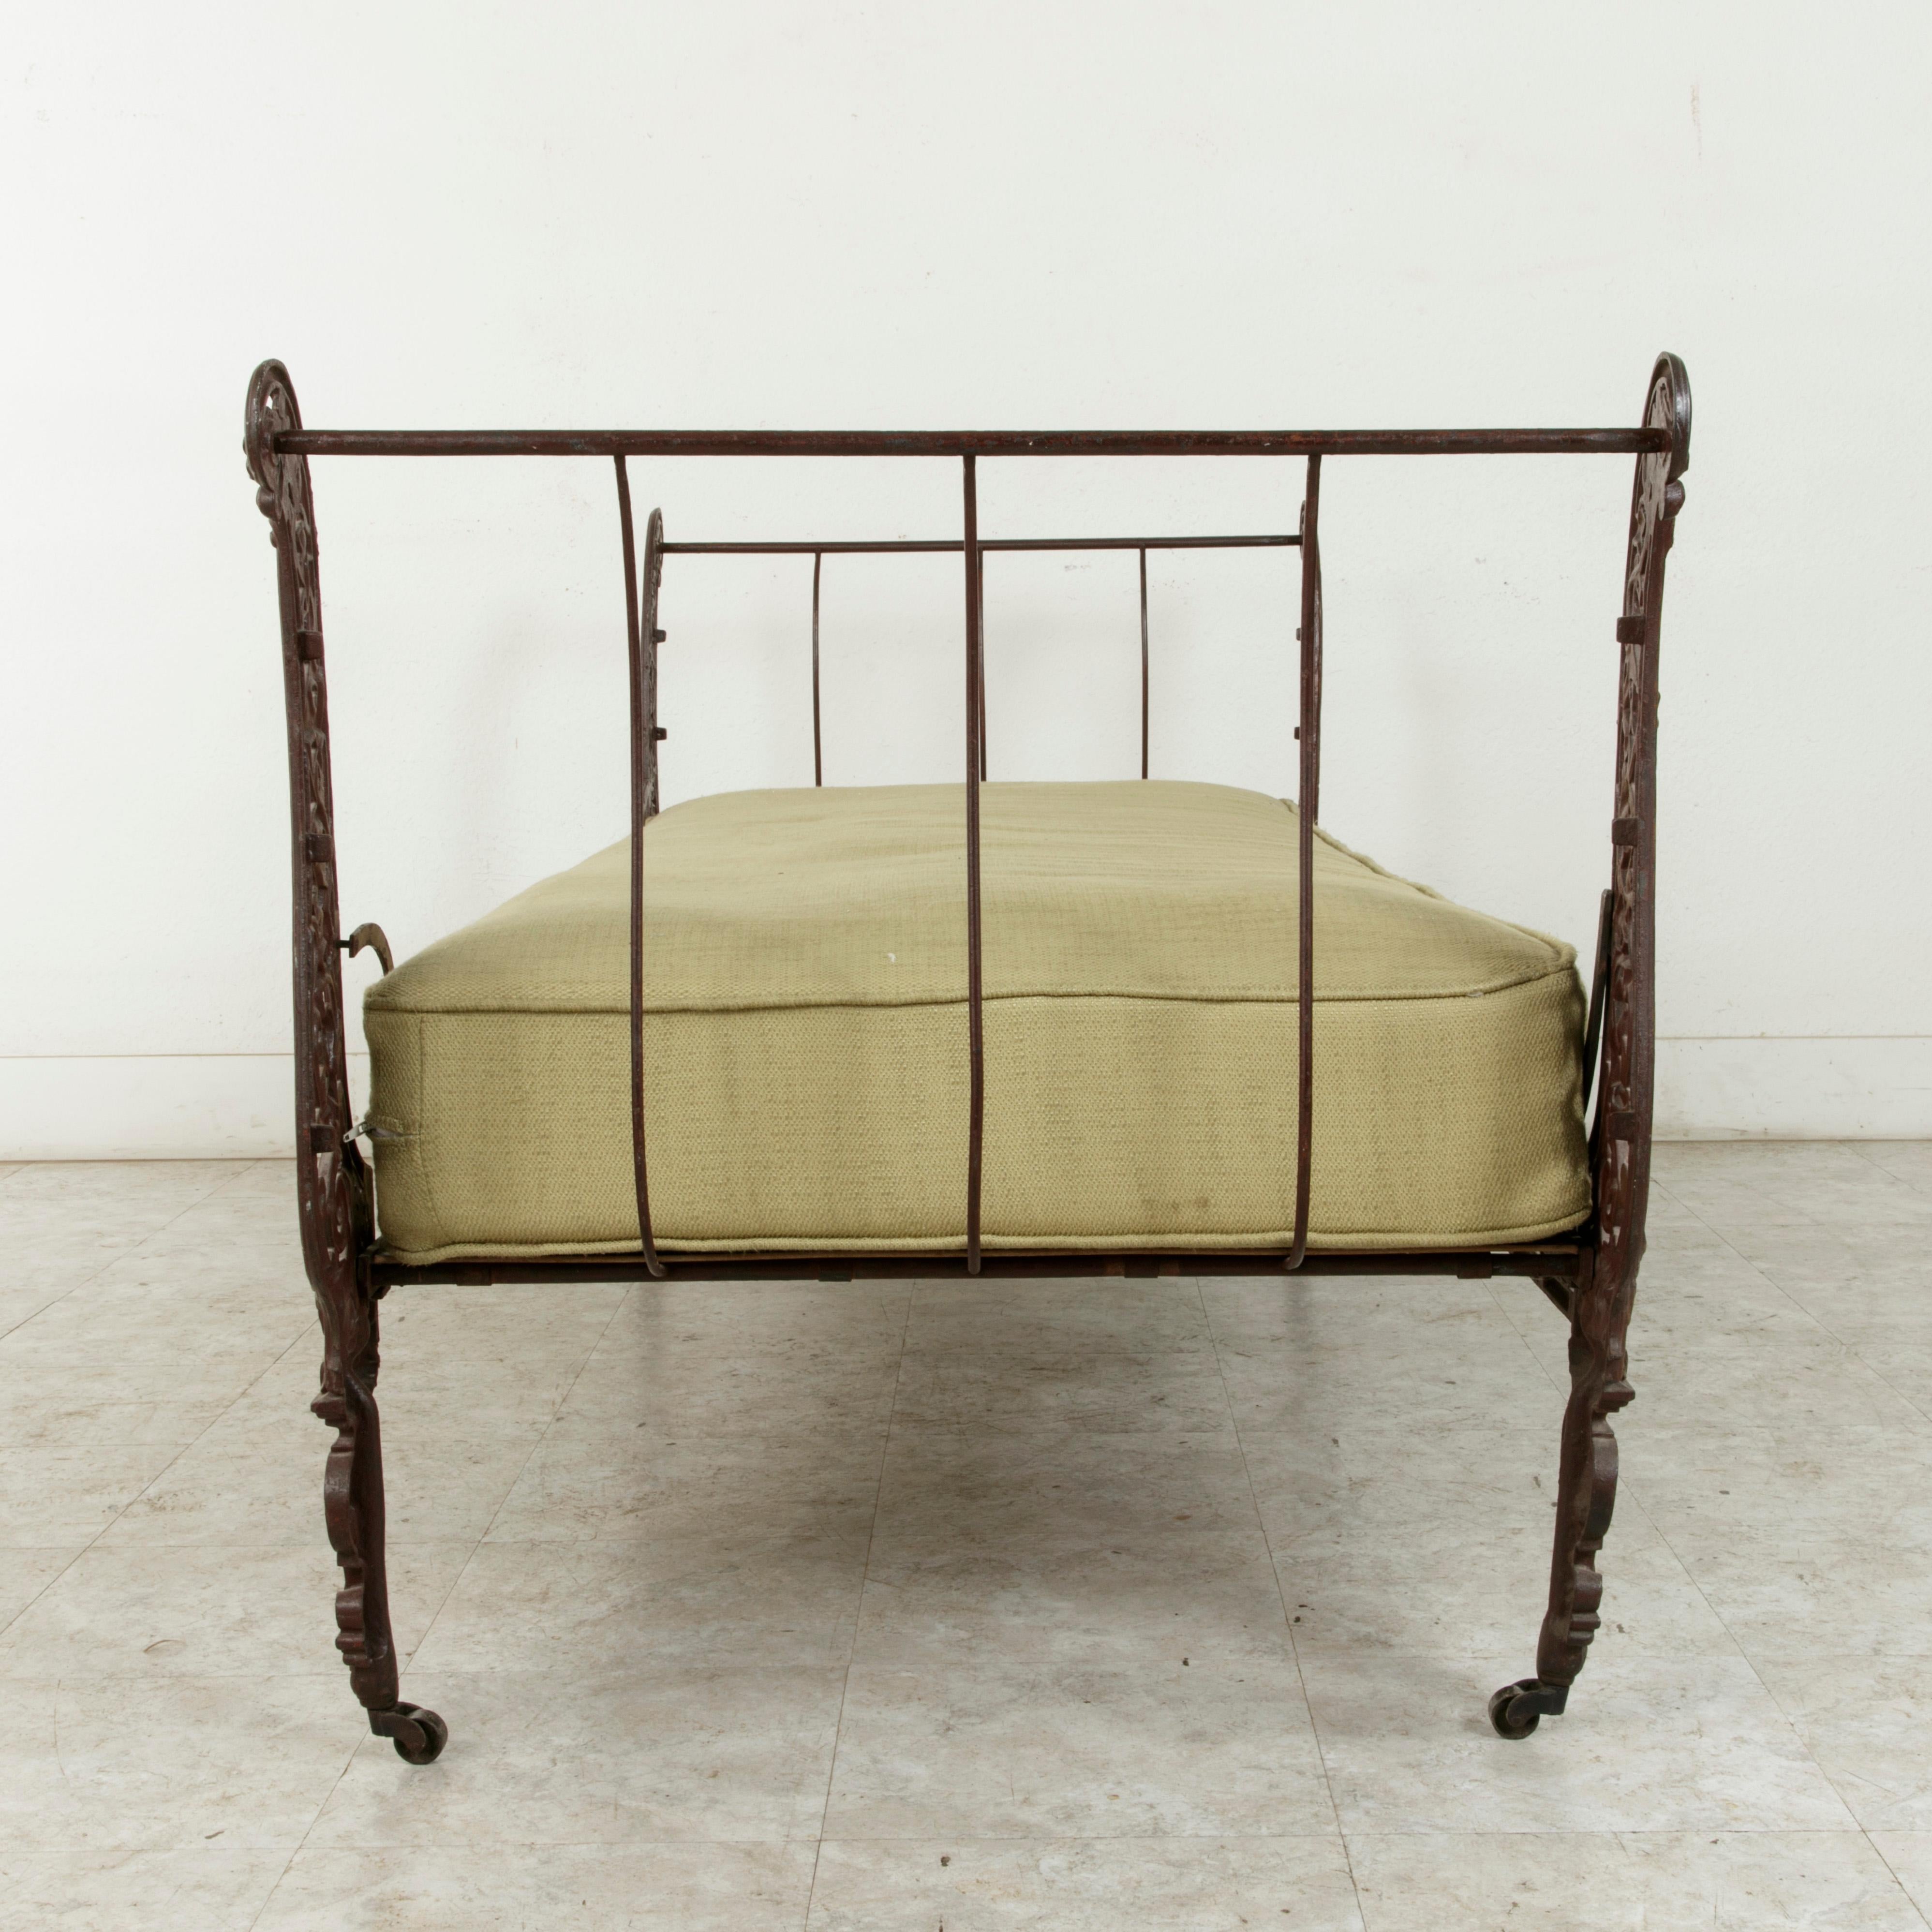 19th Century French Napoleon III Period Cast Iron Daybed or Sleigh Bed 3